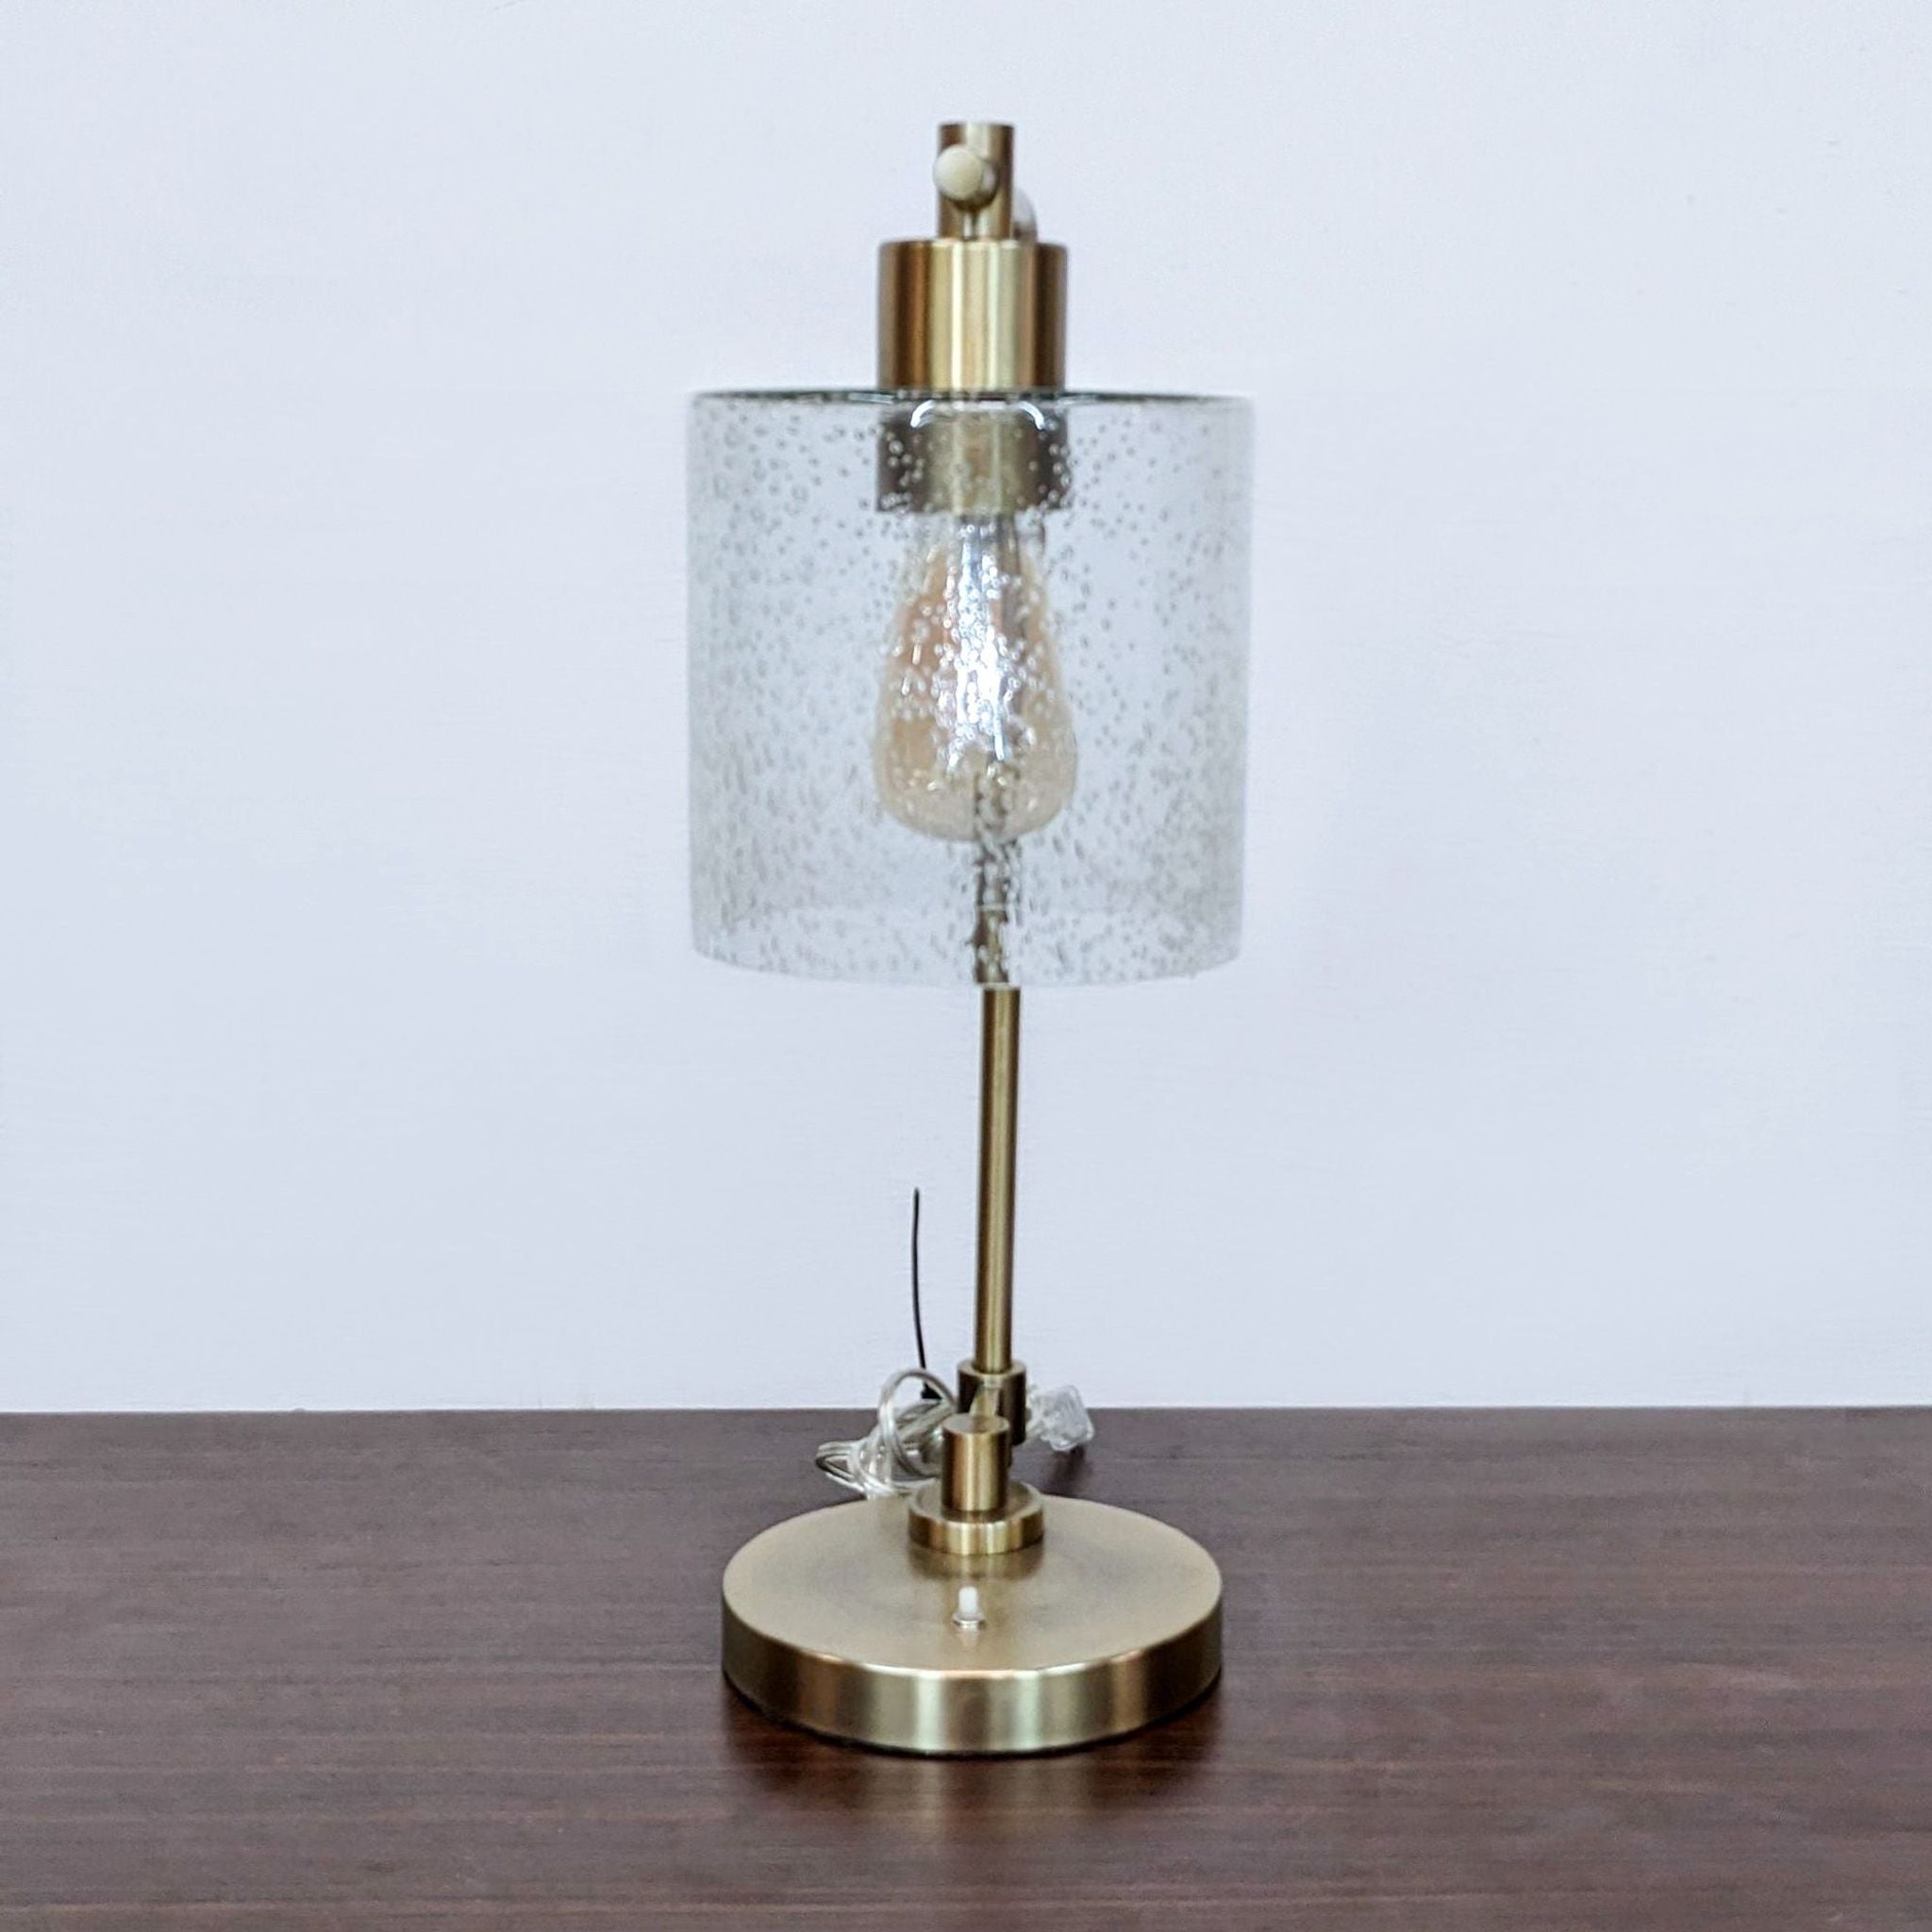 Reperch-branded modern table lamp with a speckled glass shade and gold finish on a wooden surface.